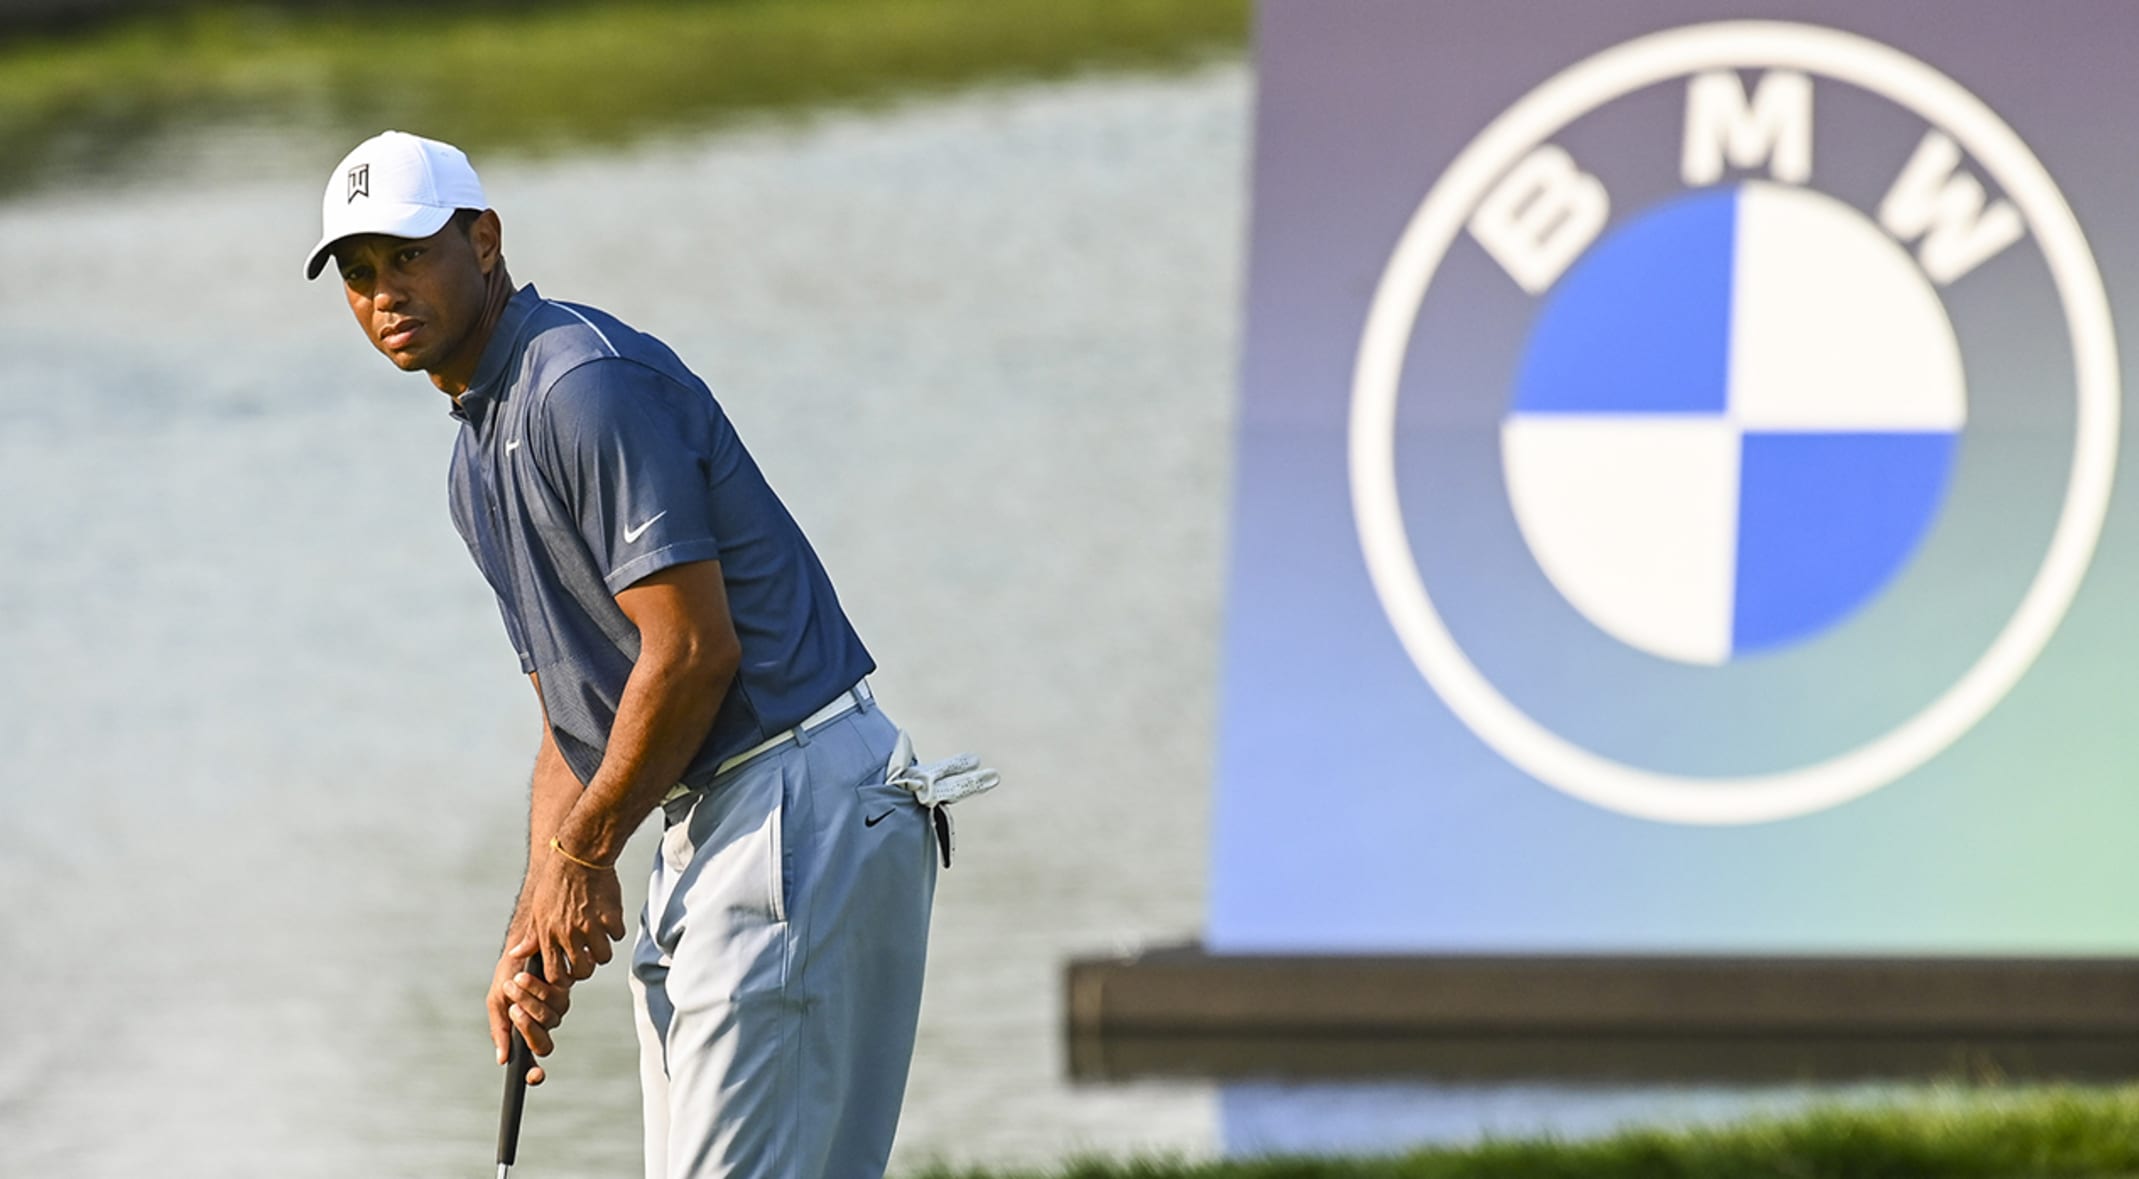 Bmw Championship Round 1 Leaderboard Tee Times Tv Times